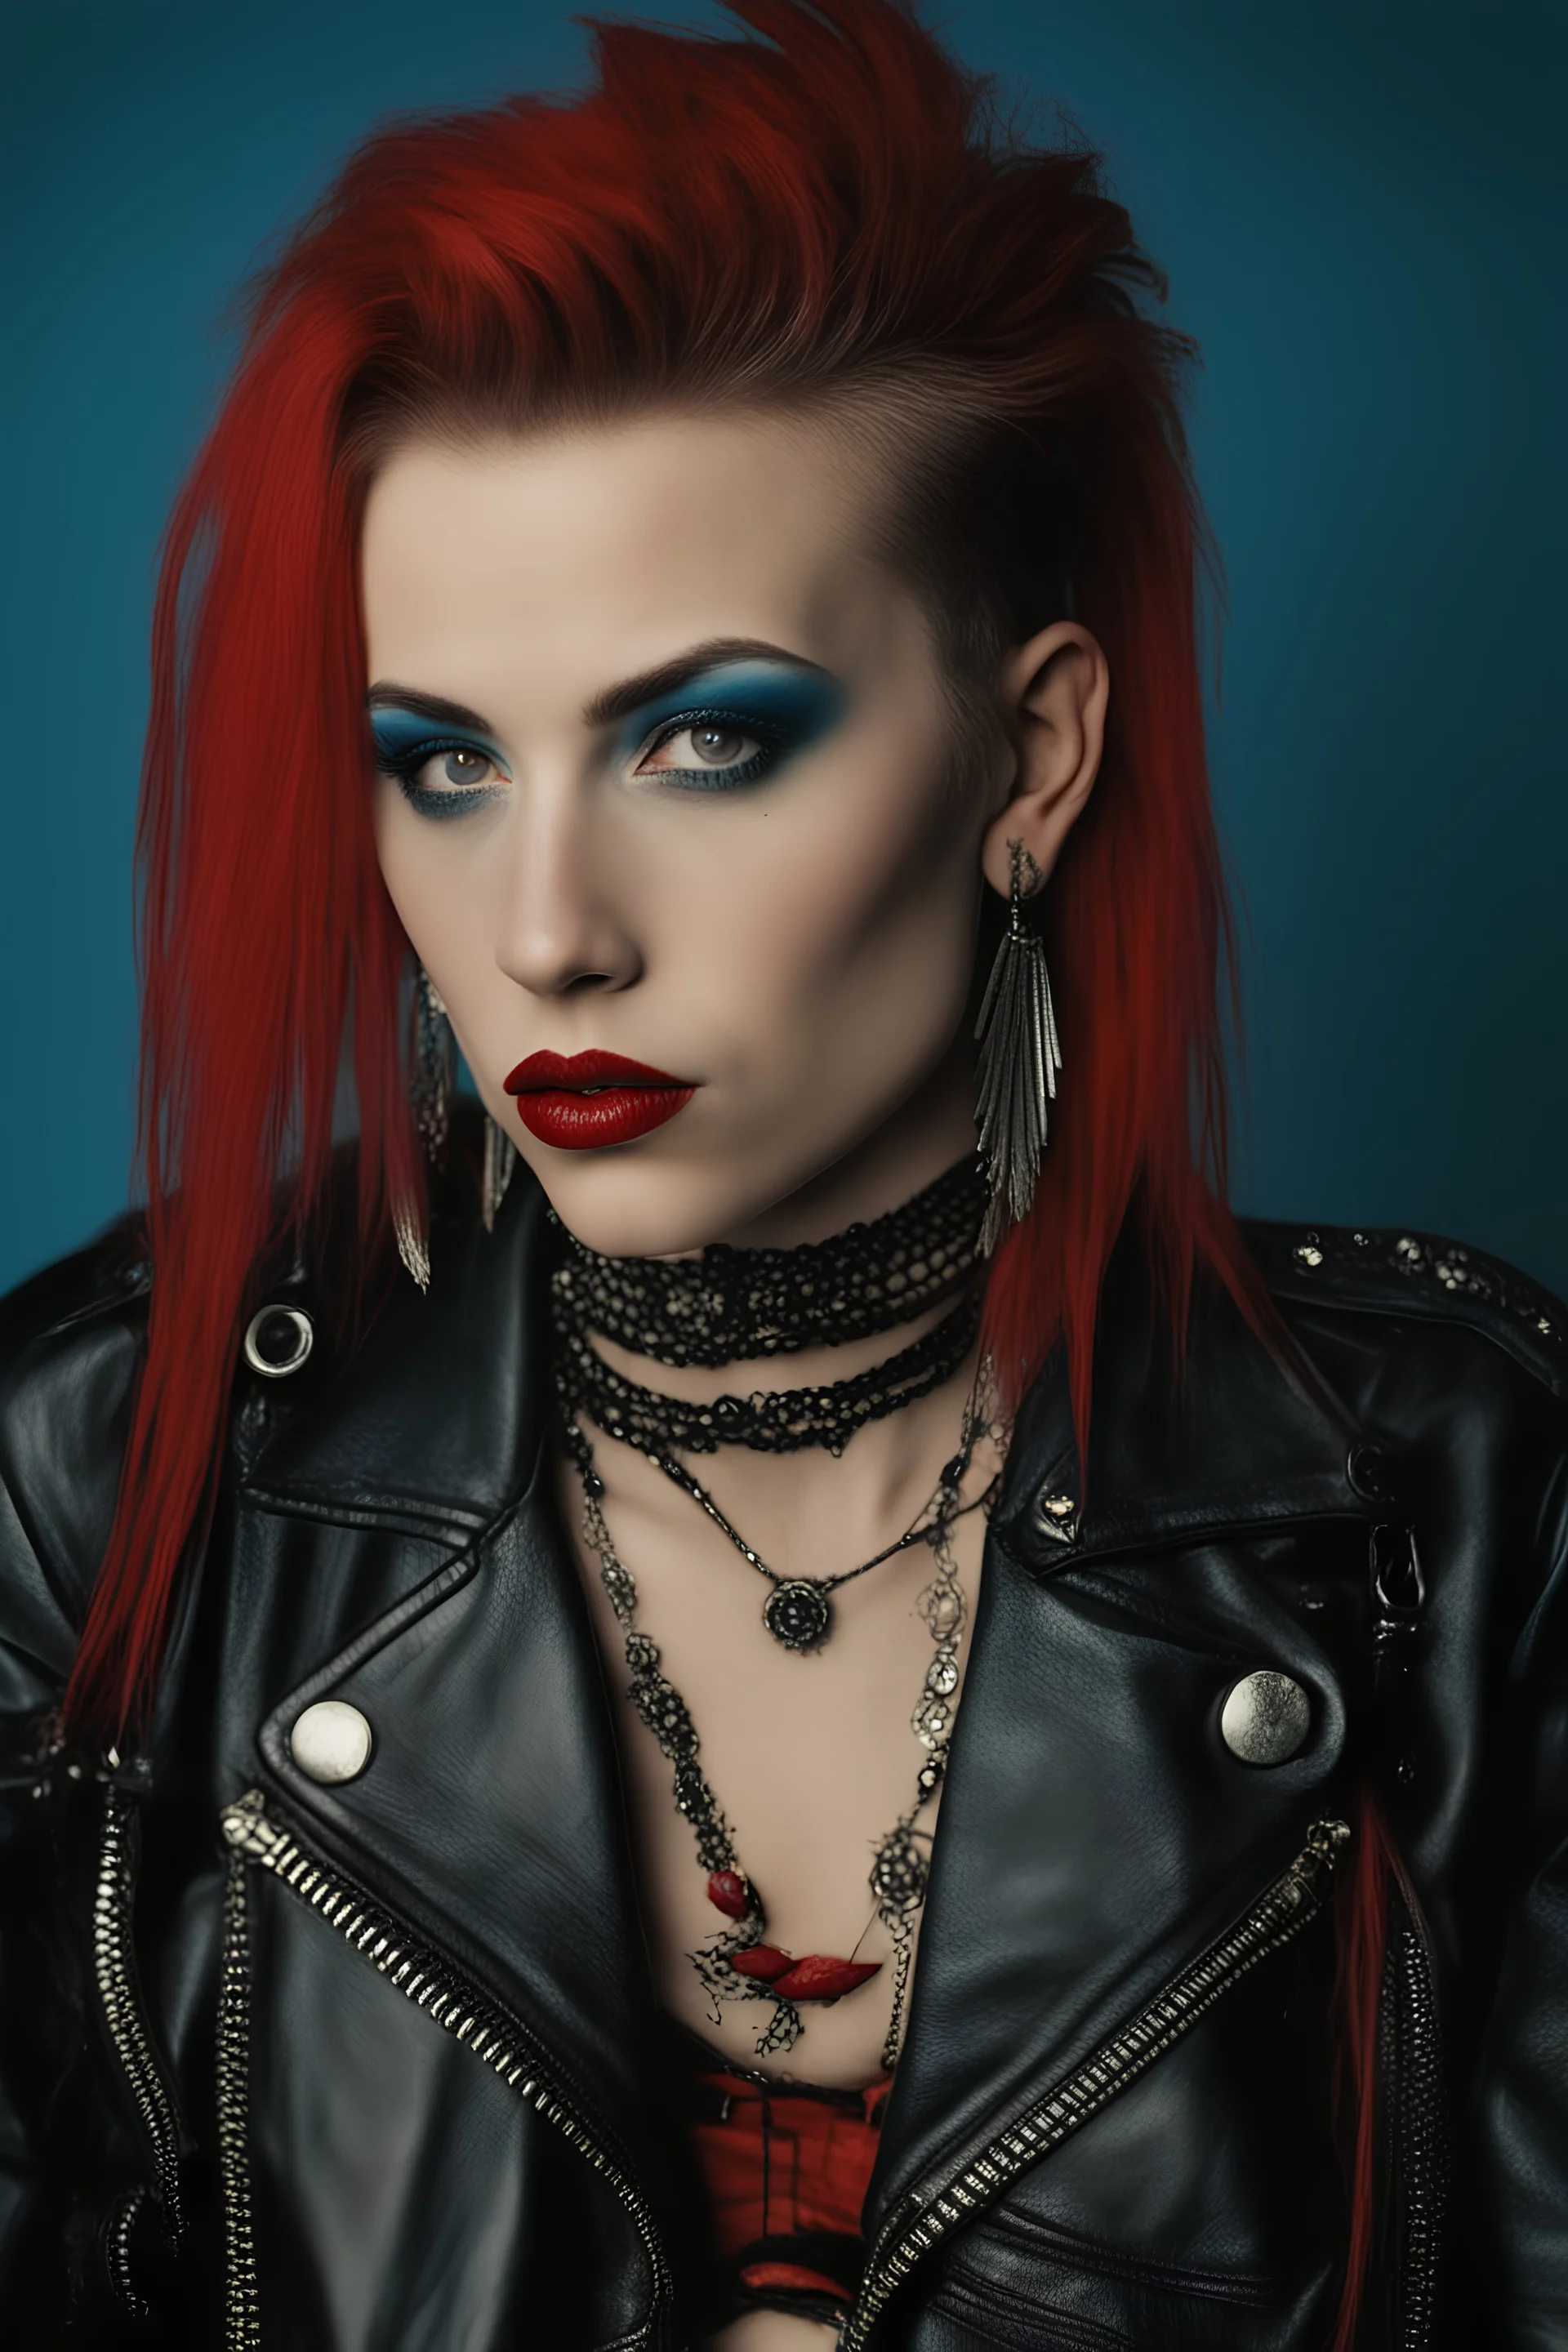 photo of a beautiful Polish young punk woman taken by a Mamiya M645 camera with portrait lens on colour medium-format film, red lips, blue eyes, red mohawk, black leather jacket, Ramones style, heavy boots, fishnet stockings, torn t-shirt, nosering, few earrings, belly ring